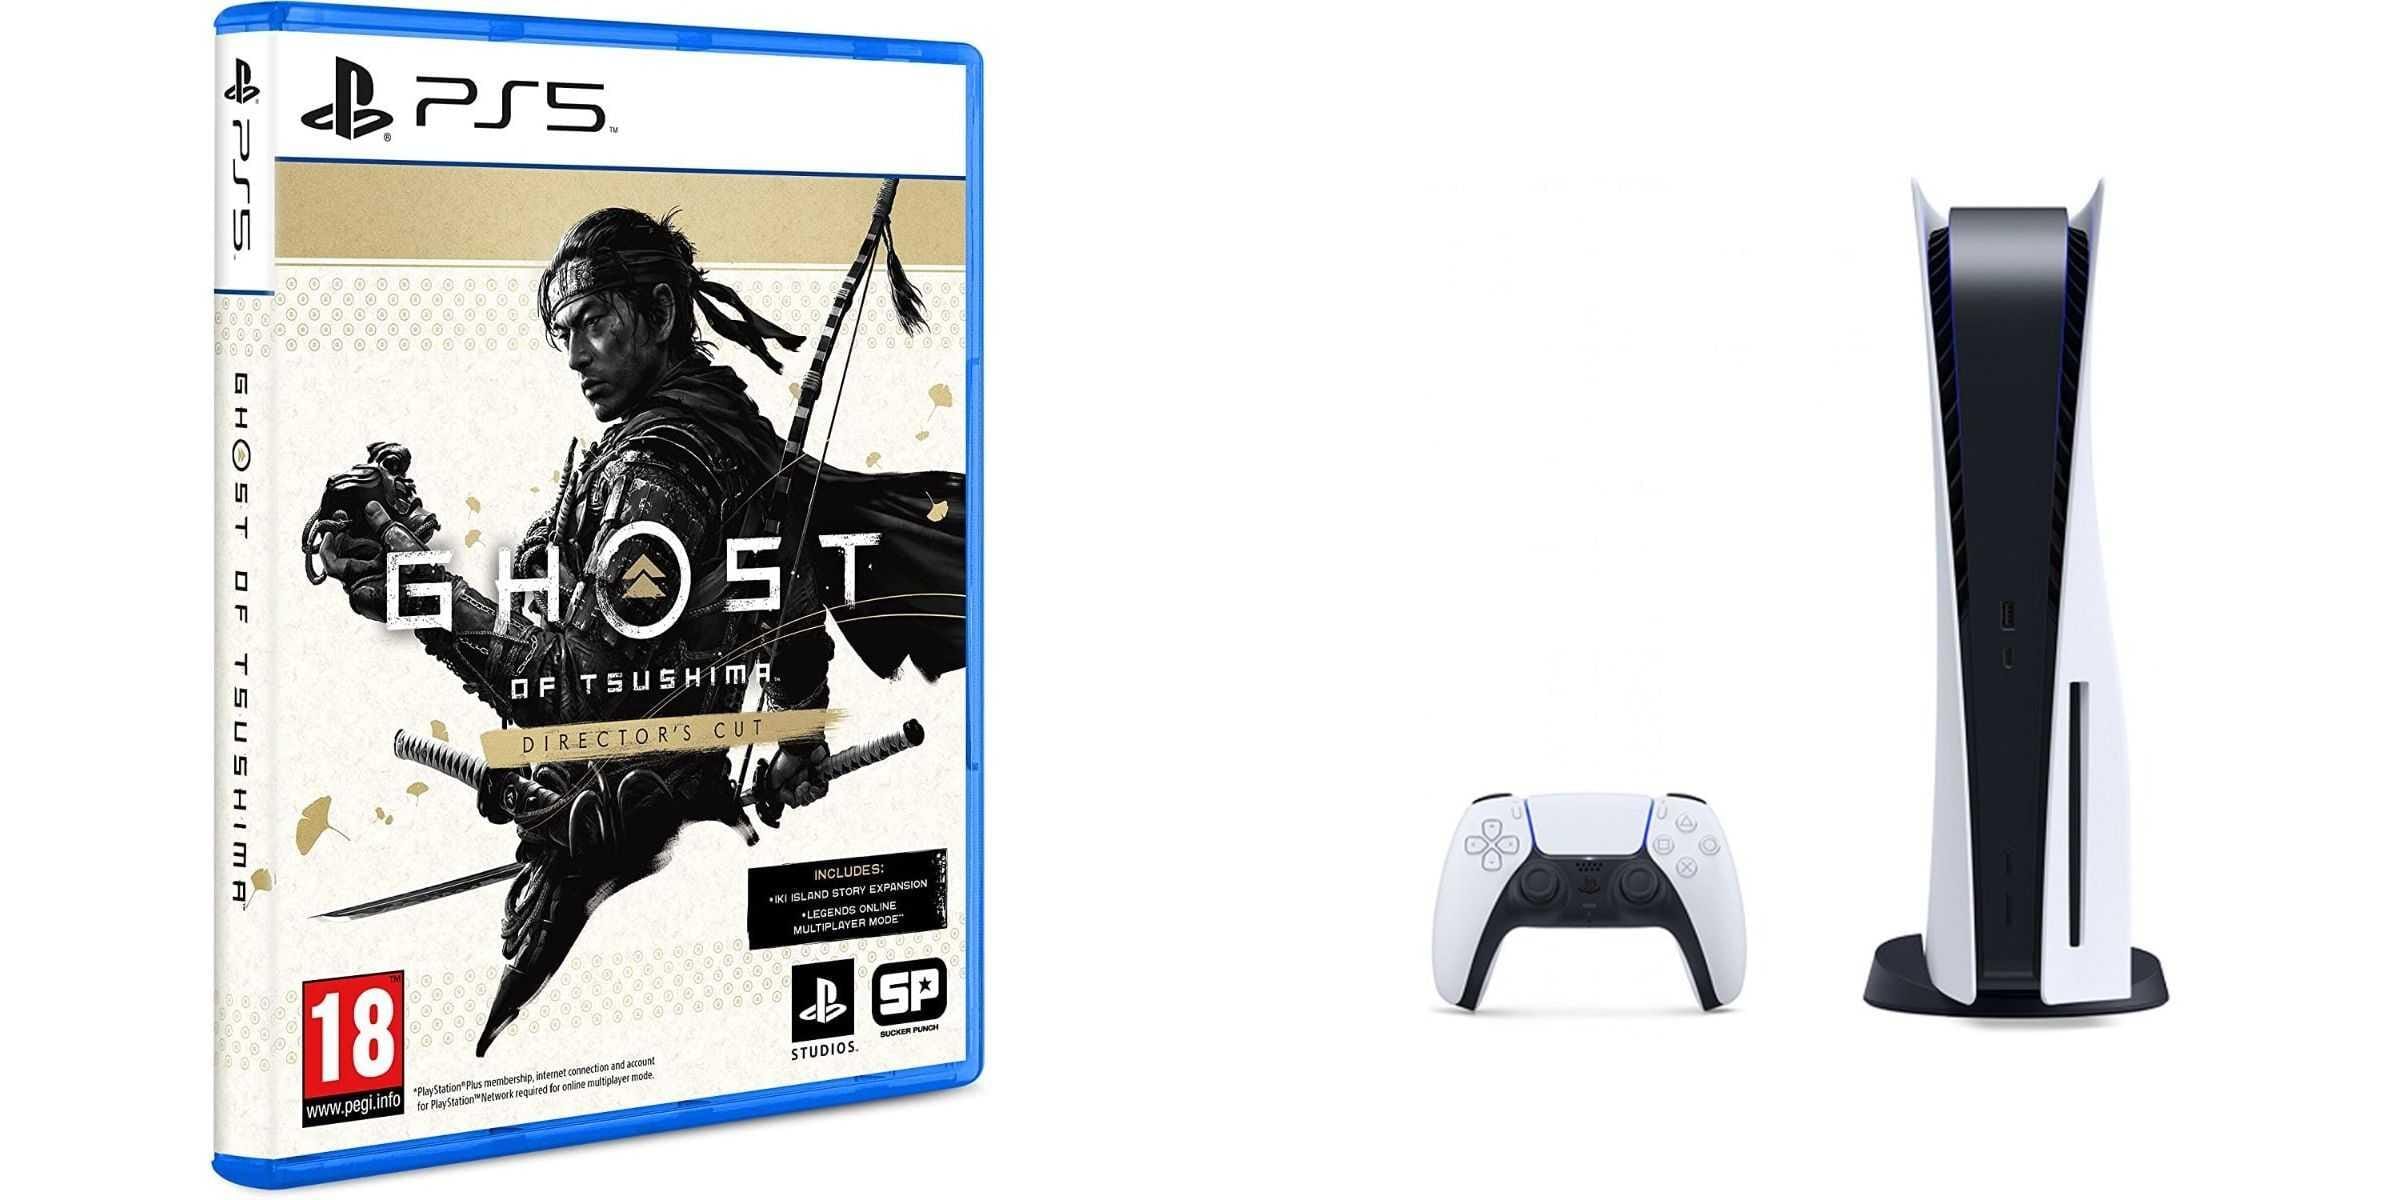 Sony PlayStation 5, 1 Wireless Controller, White - CFI-1016A01 MEE, with Ghost Of Tsushima Director's Cut for PlayStation 5